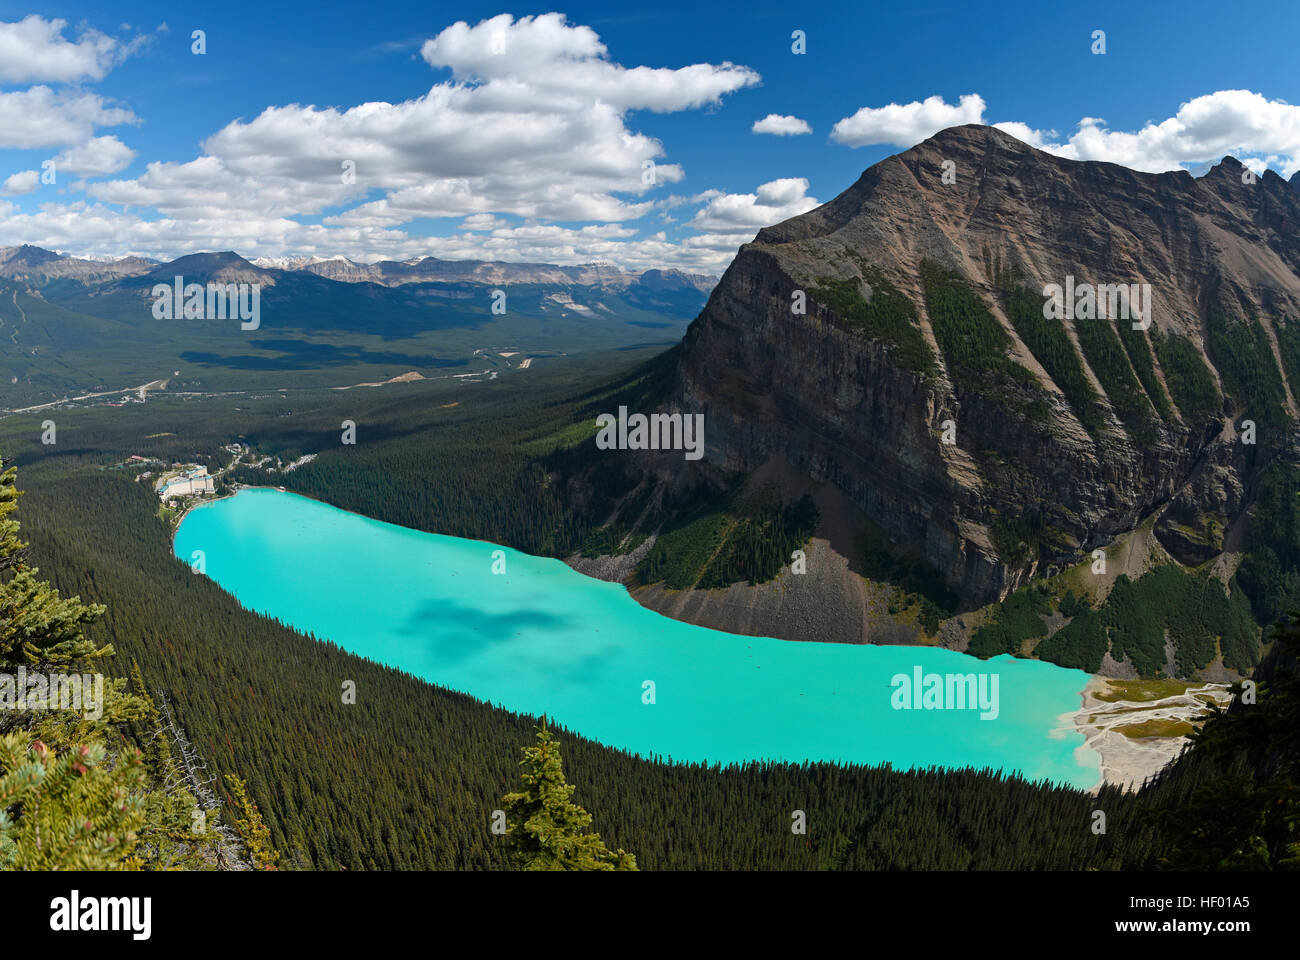 Turquoise Lake Louise with Mount Fairview, view from Icefield Parkway, Banff National Park, Rocky Mountains, Alberta, Canada Stock Photo